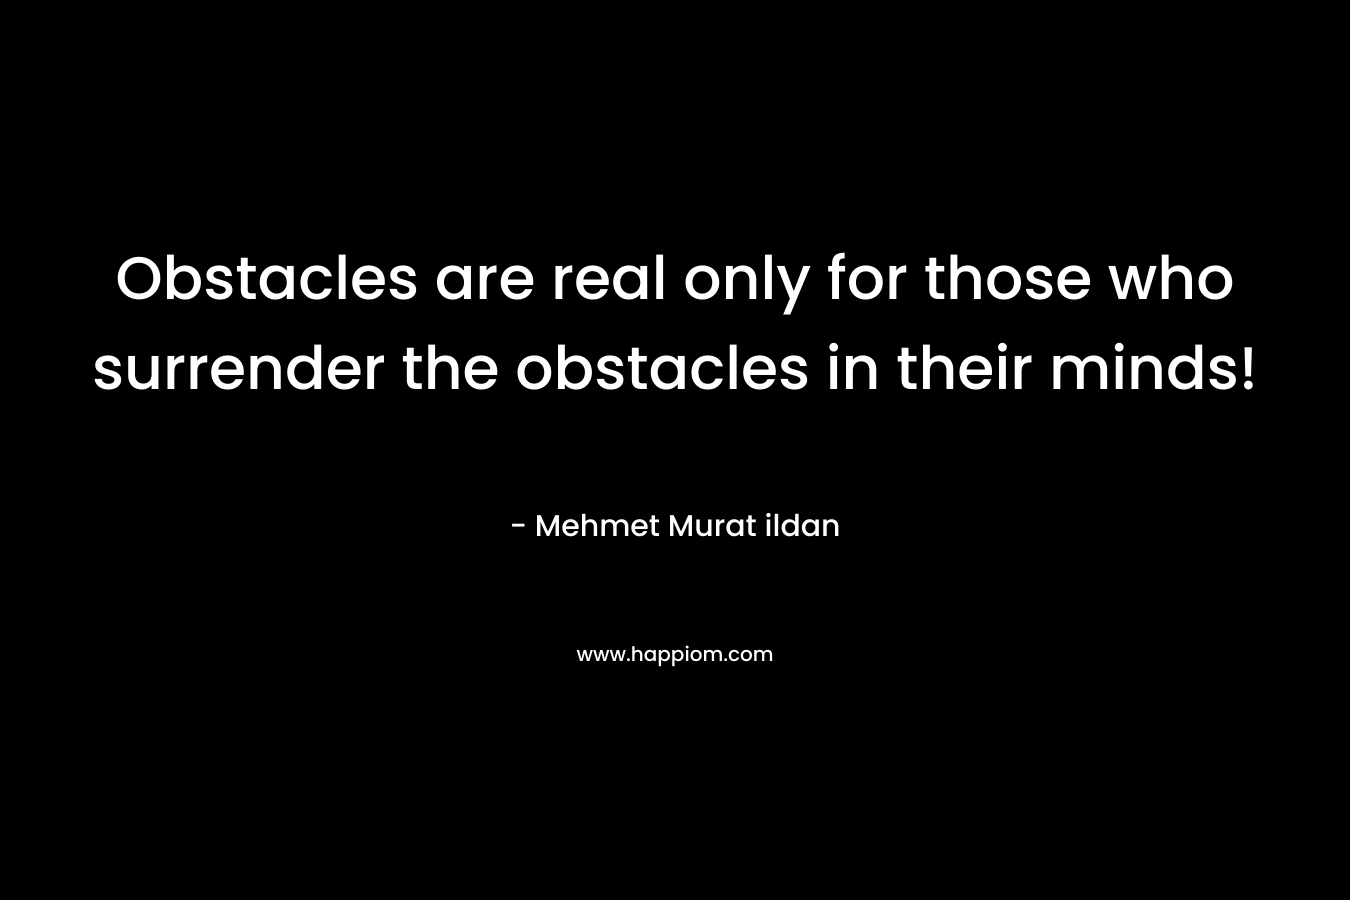 Obstacles are real only for those who surrender the obstacles in their minds!